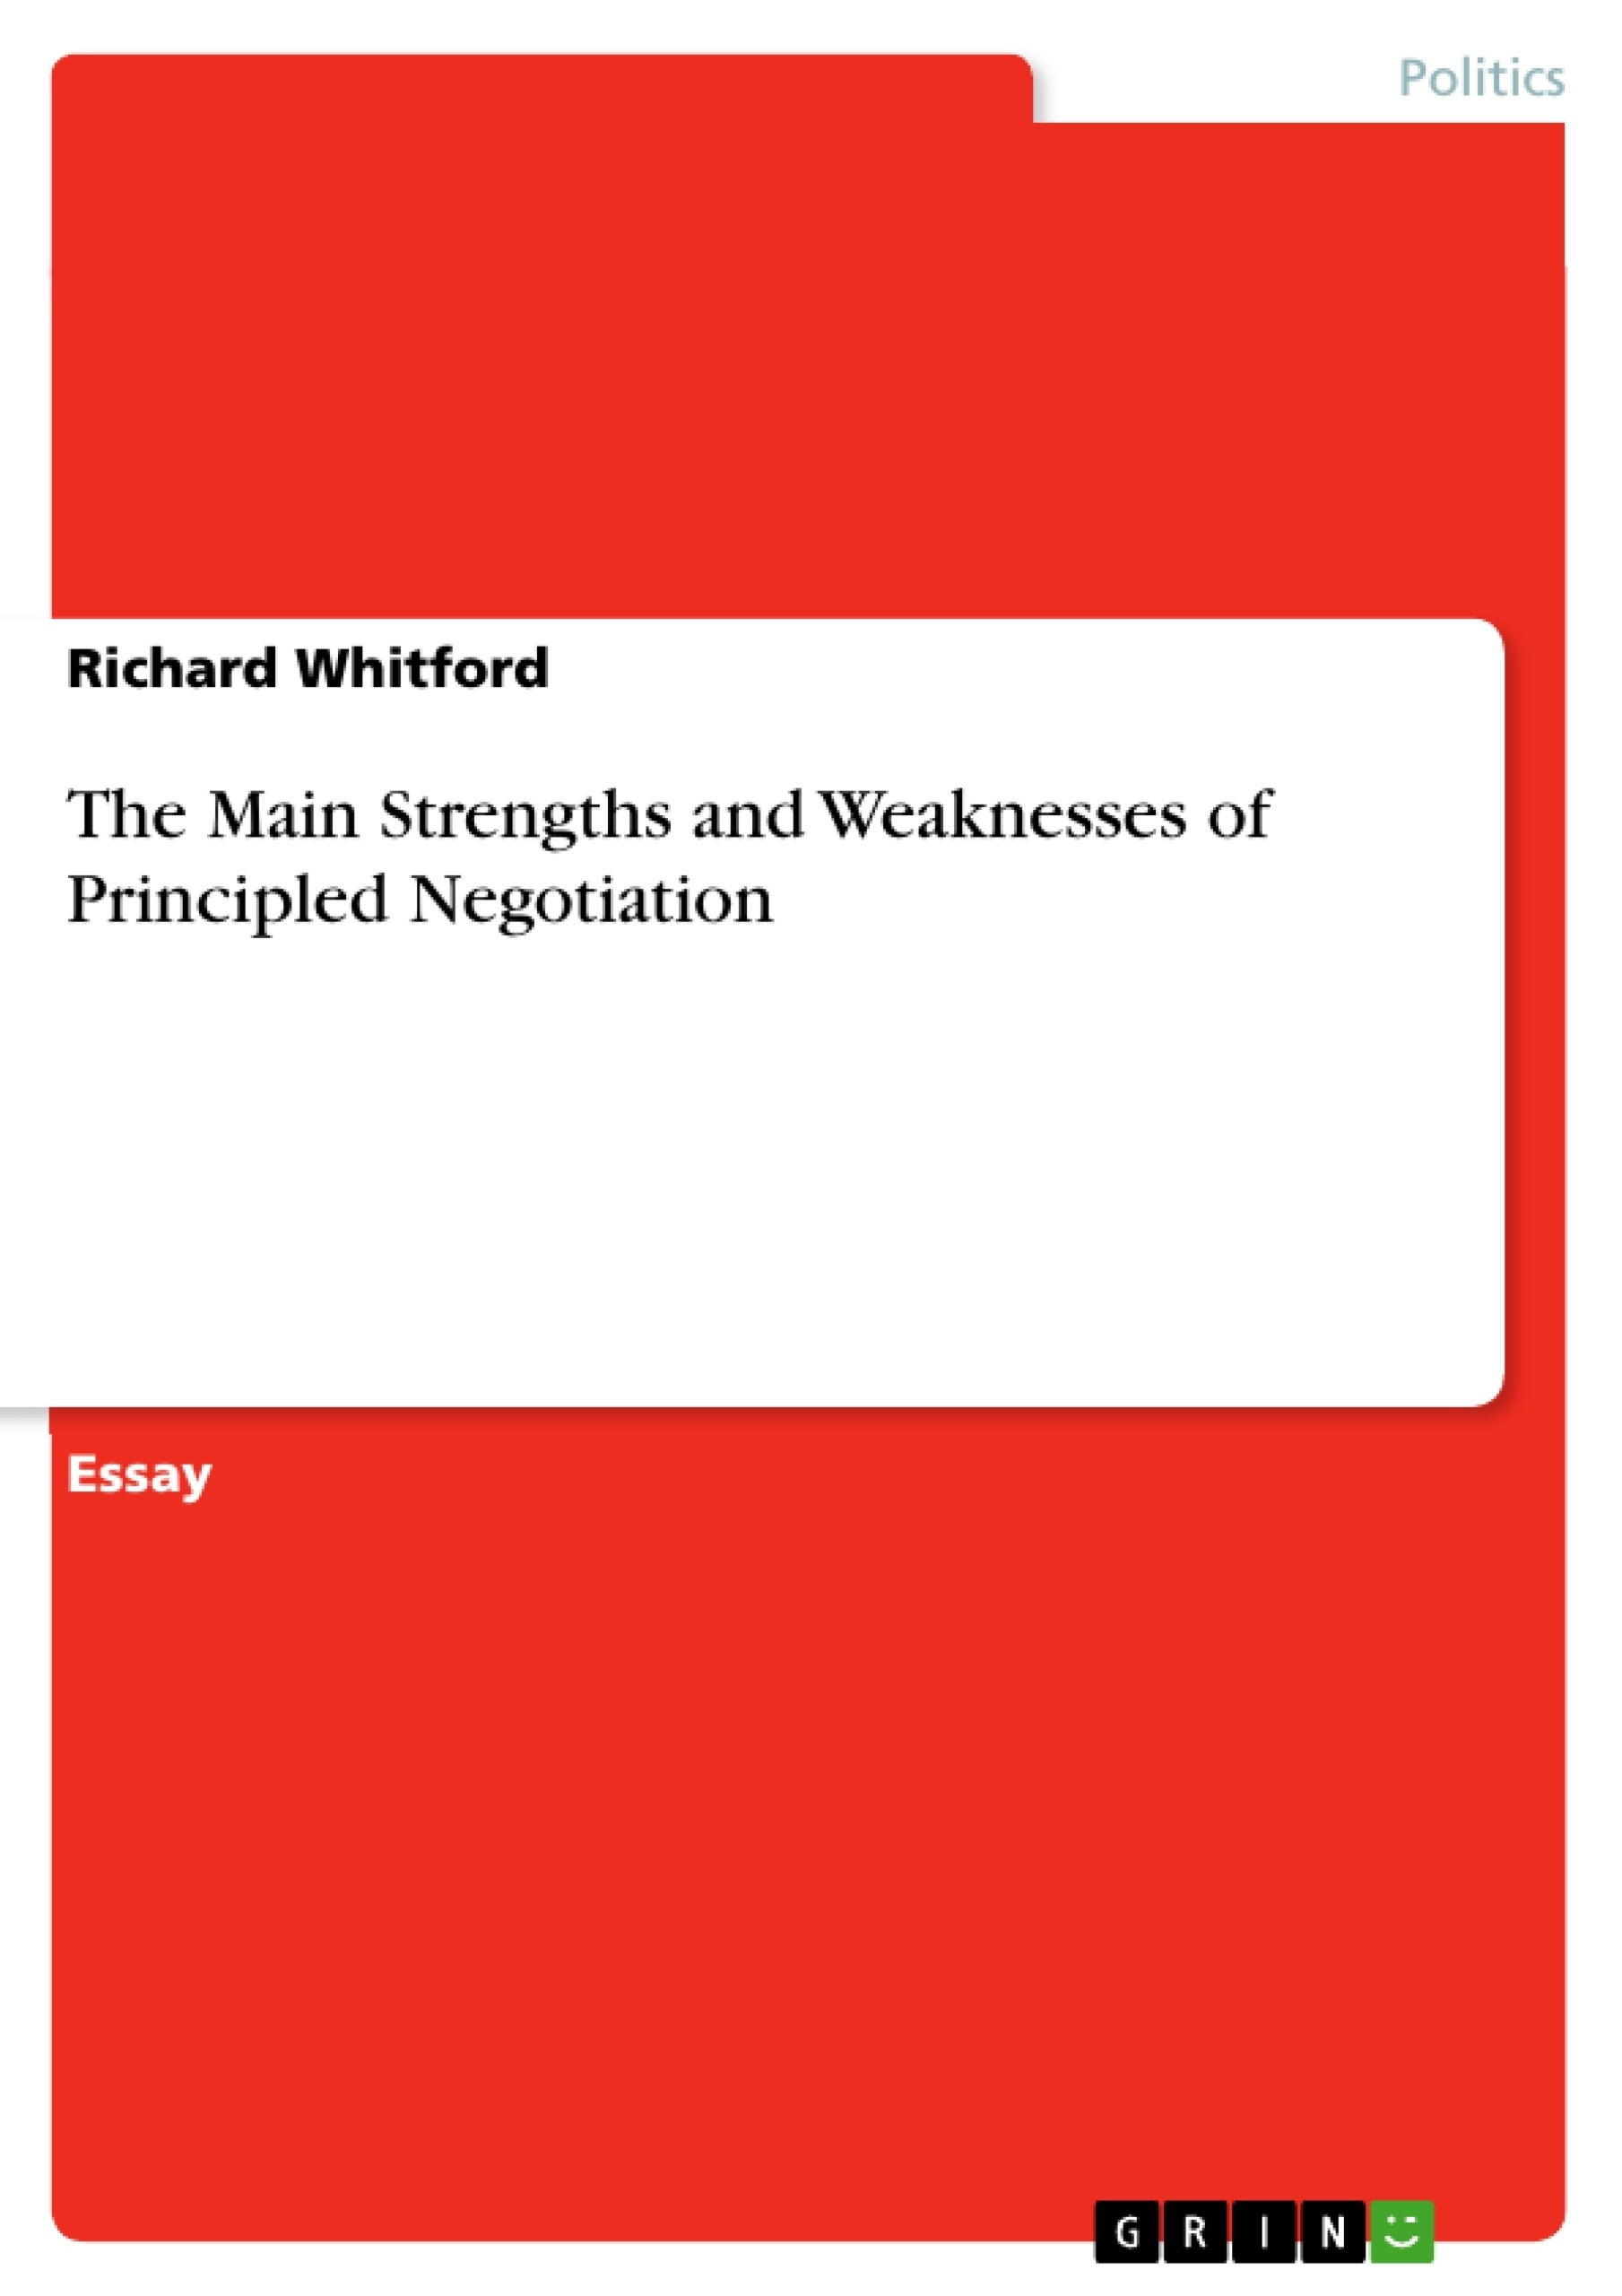 Title: The Main Strengths and Weaknesses of Principled Negotiation